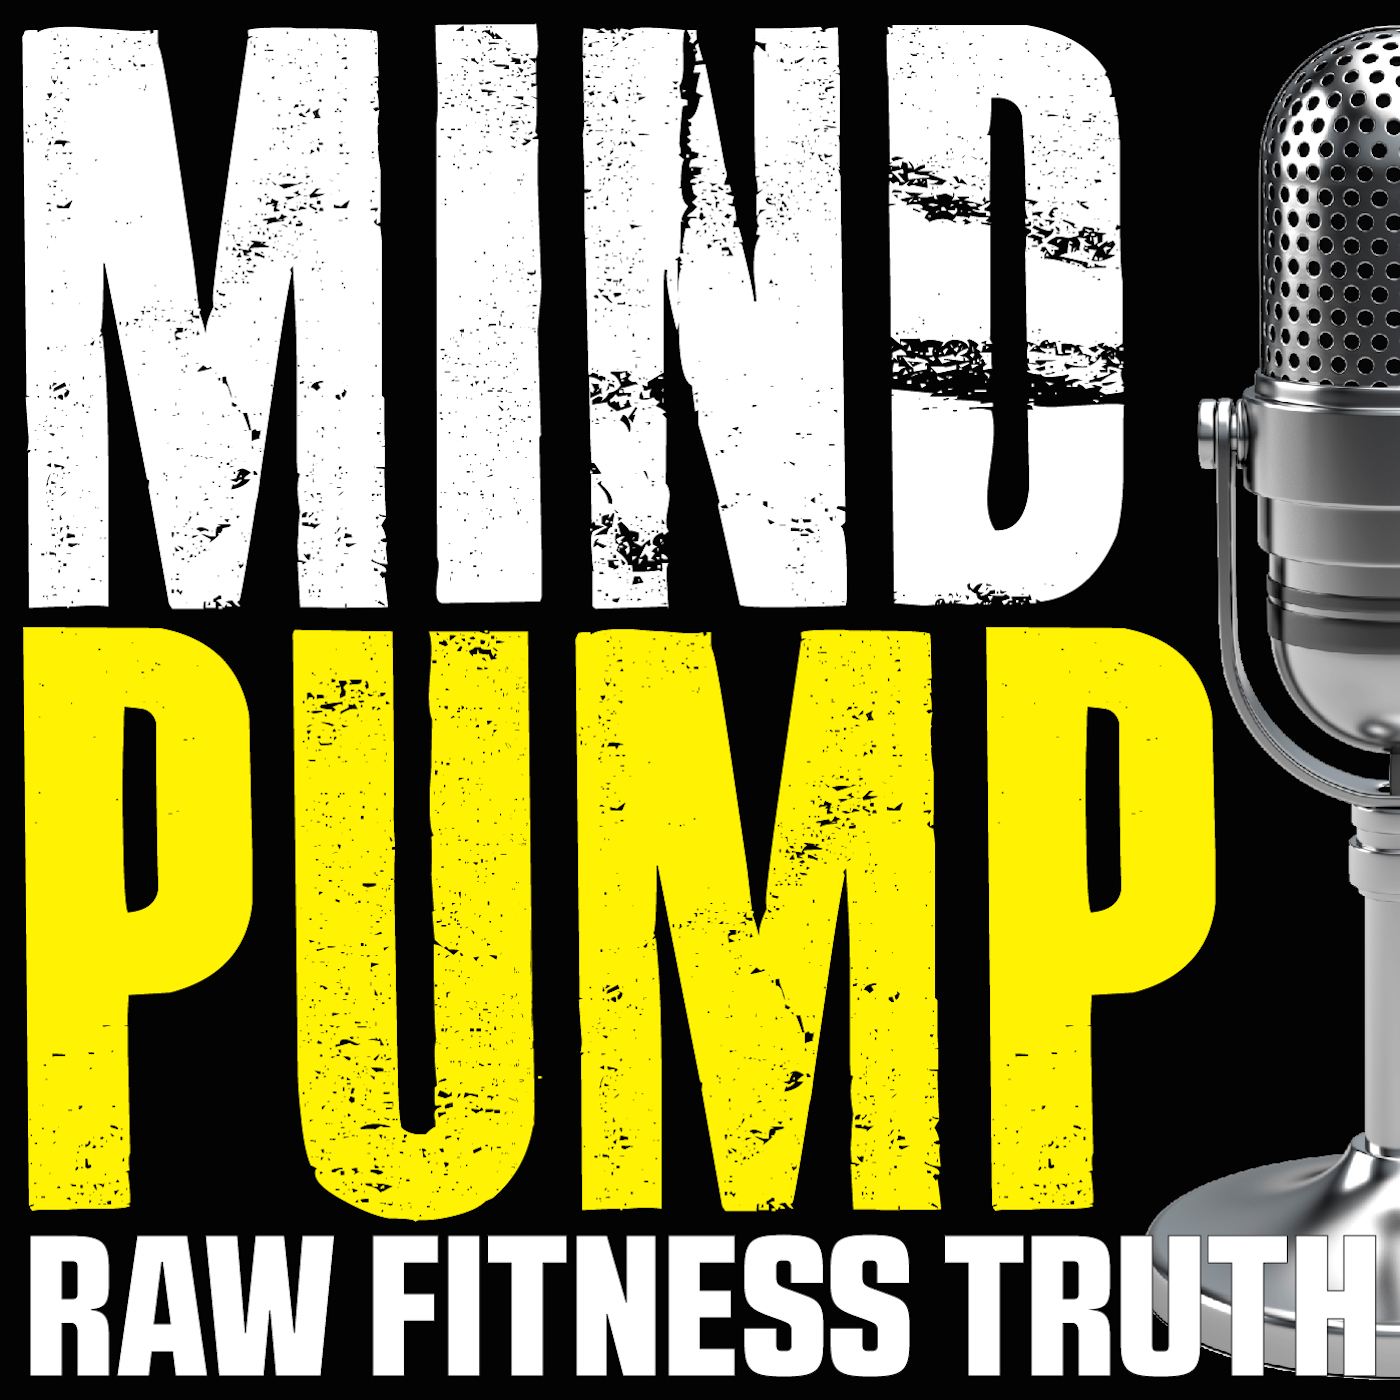 293: Frequency for Muscle Growth